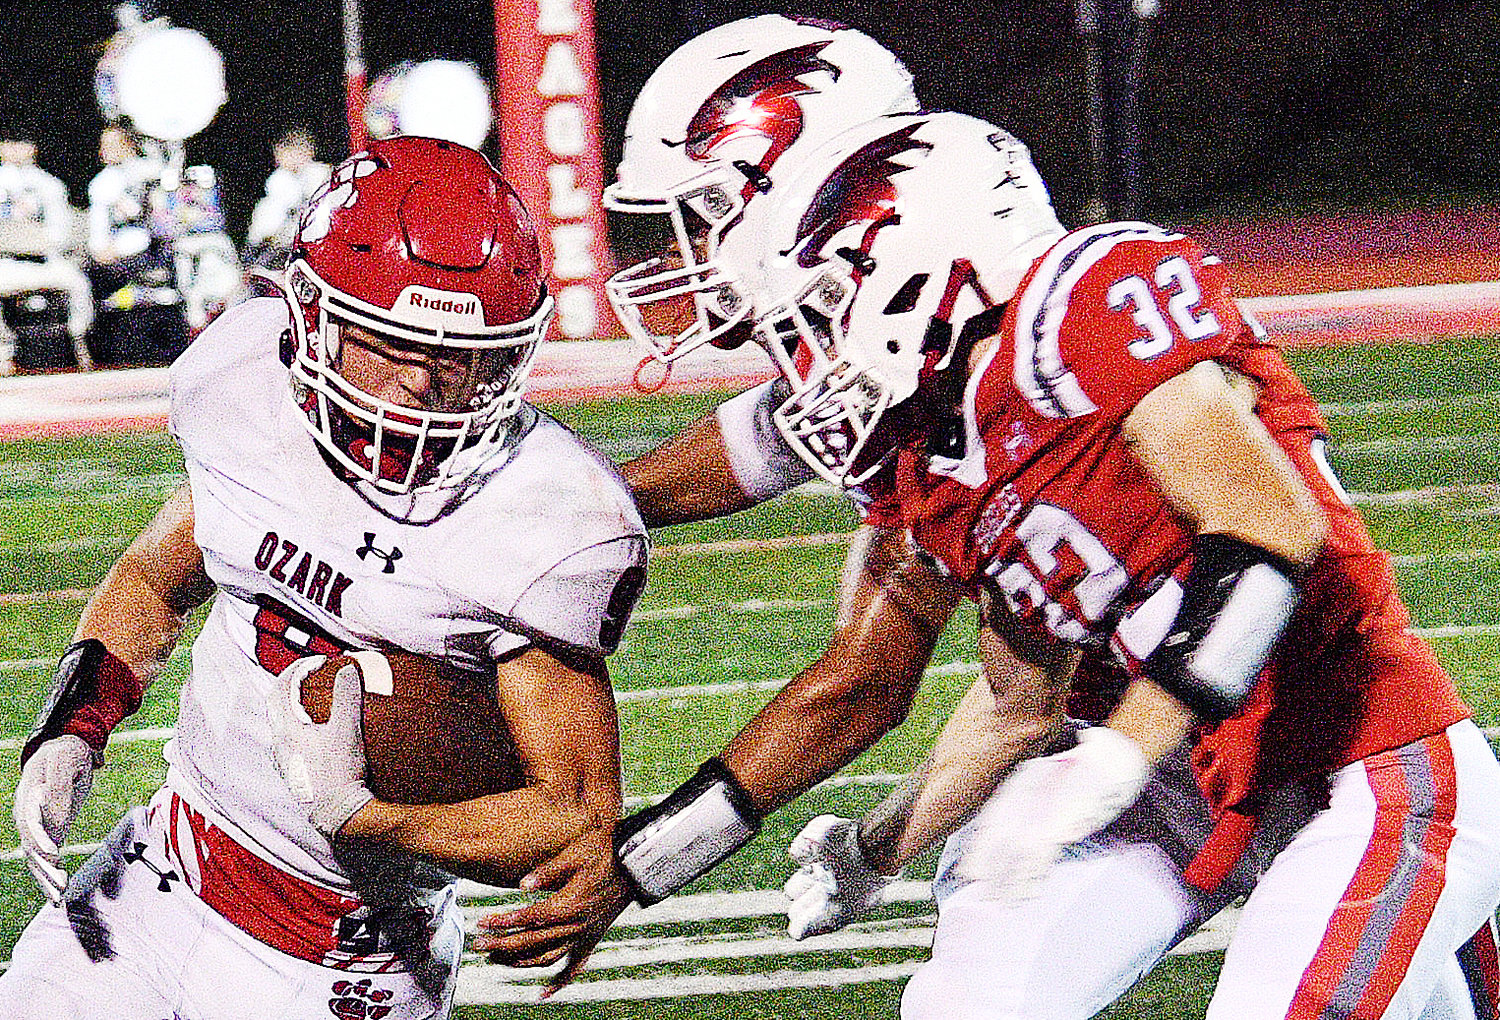 OZARK'S JACE EASLEY had 19 catches for 386 yards during his senior season